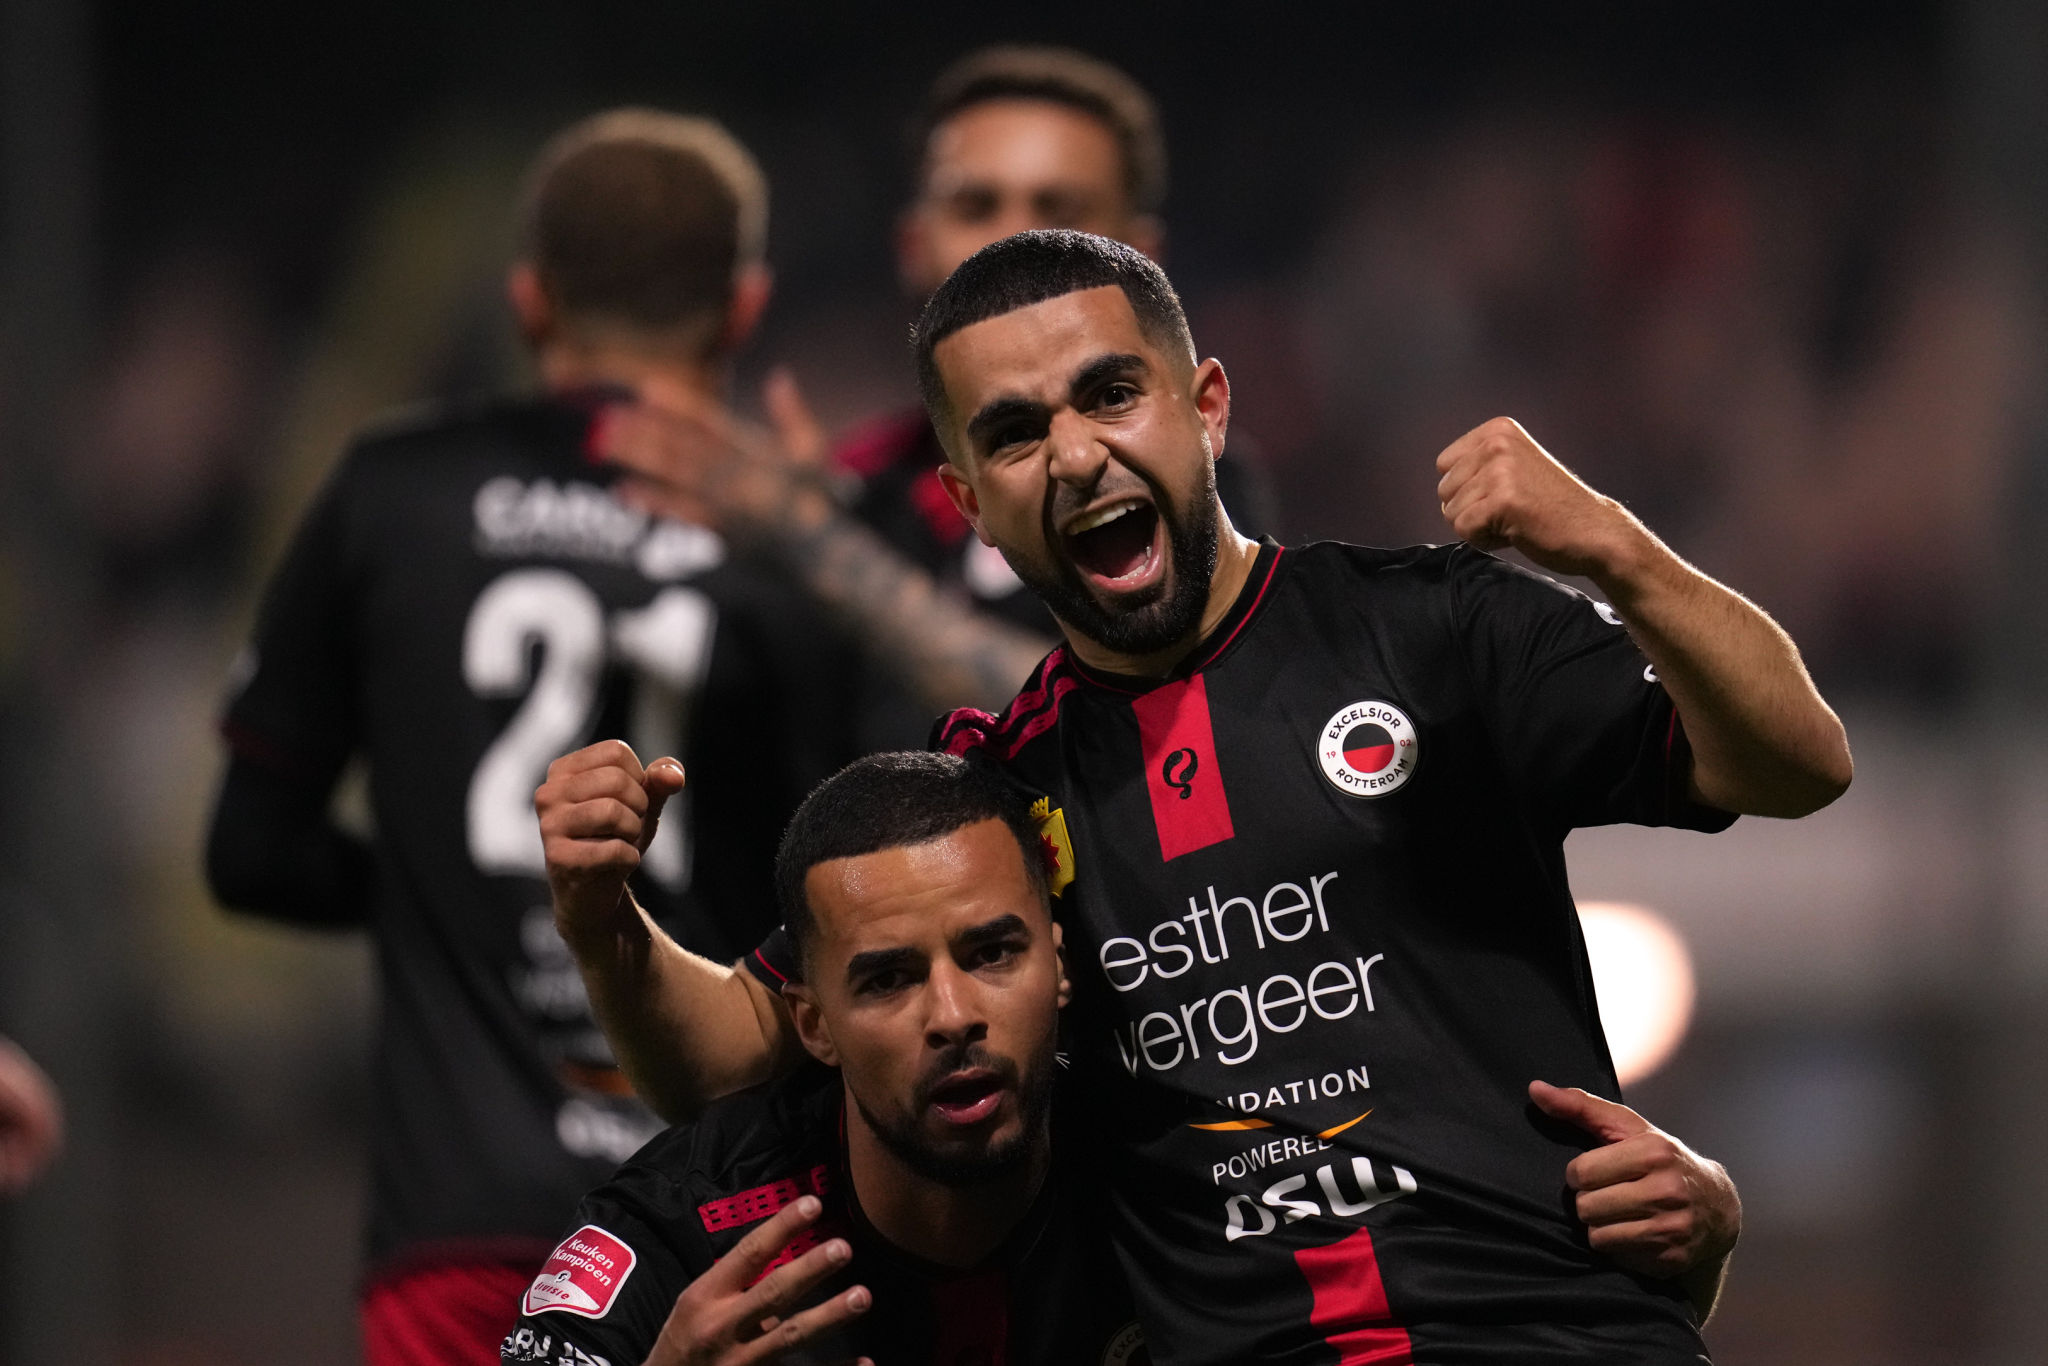 VOLENDAM, NETHERLANDS - MARCH 11: Marouan Azarkan of Excelsior celebrating his goal during the Dutch Keukenkampioendivisie match between FC Volendam and Excelsior at the Kras Stadion on March 11, 2022 in Volendam, Netherlands (Photo by Patrick Goosen/BSR Agency/Getty Images)